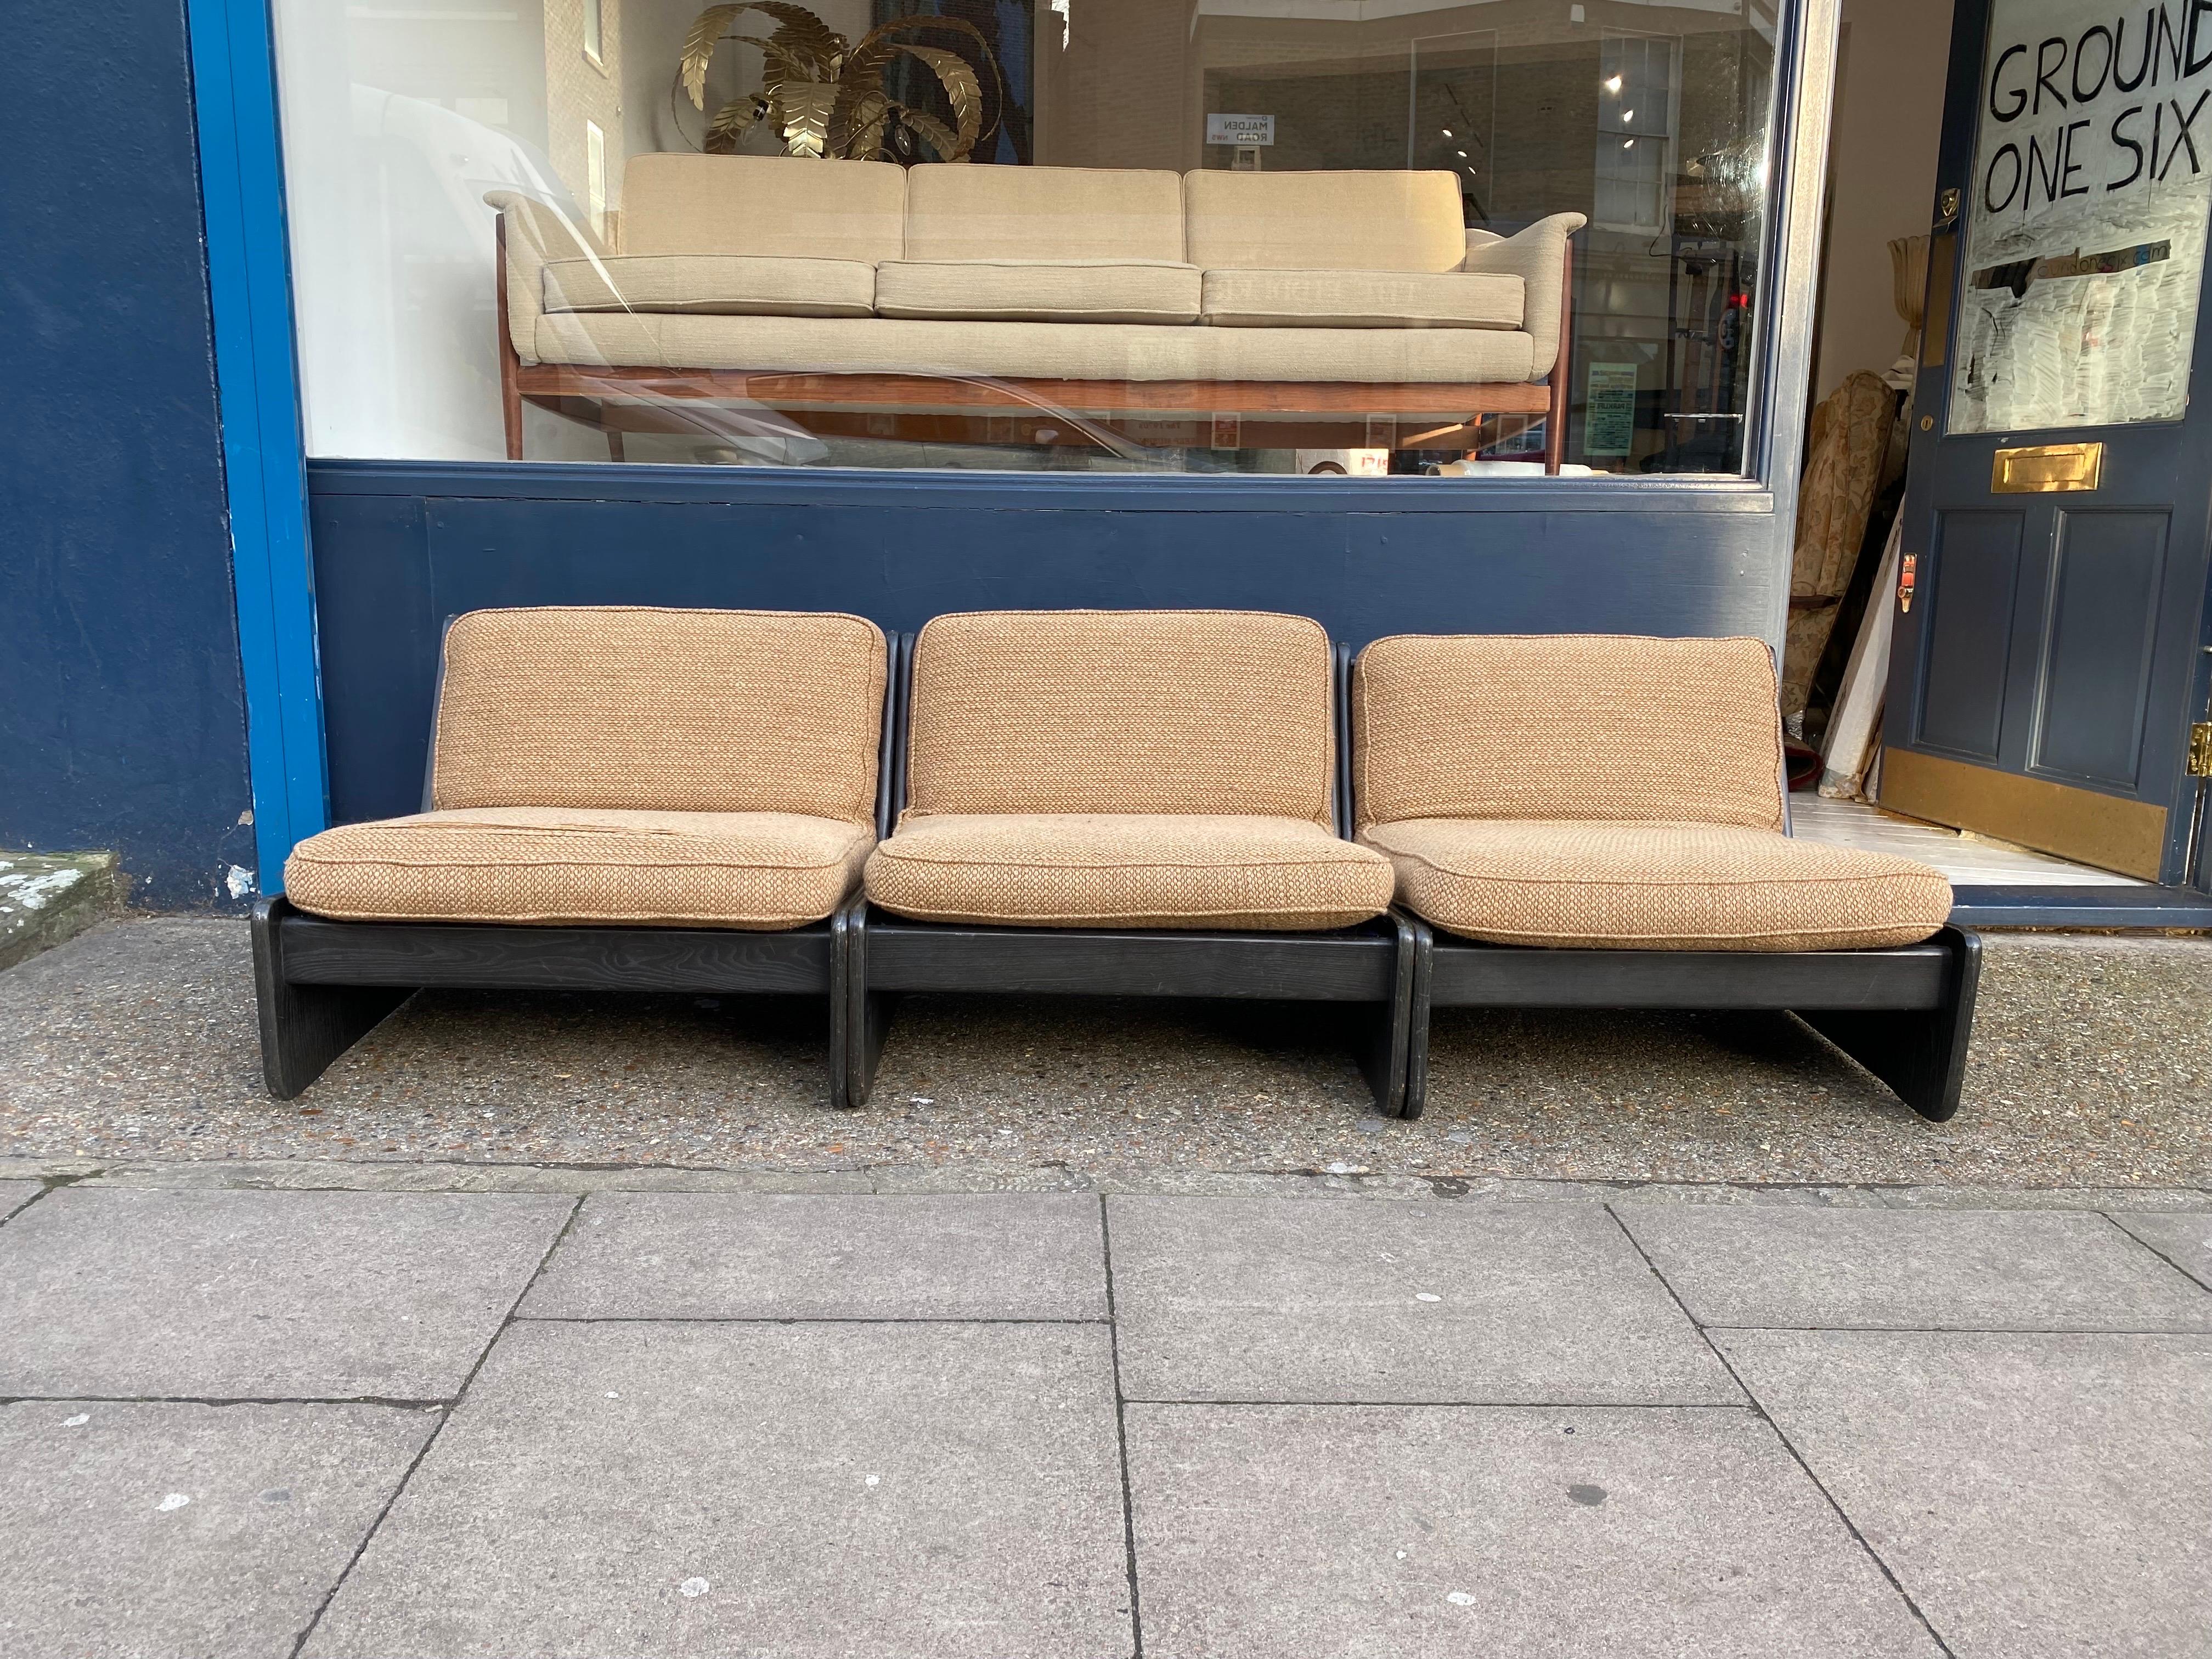 Three piece modular lounge sofa in brown wood frame and beige wool upholstery by Carl Straub.
Supremely comfortable, and with a sleek low seat and back, this sofa would be ideal for any interior due to its versatility and combination possibilities.